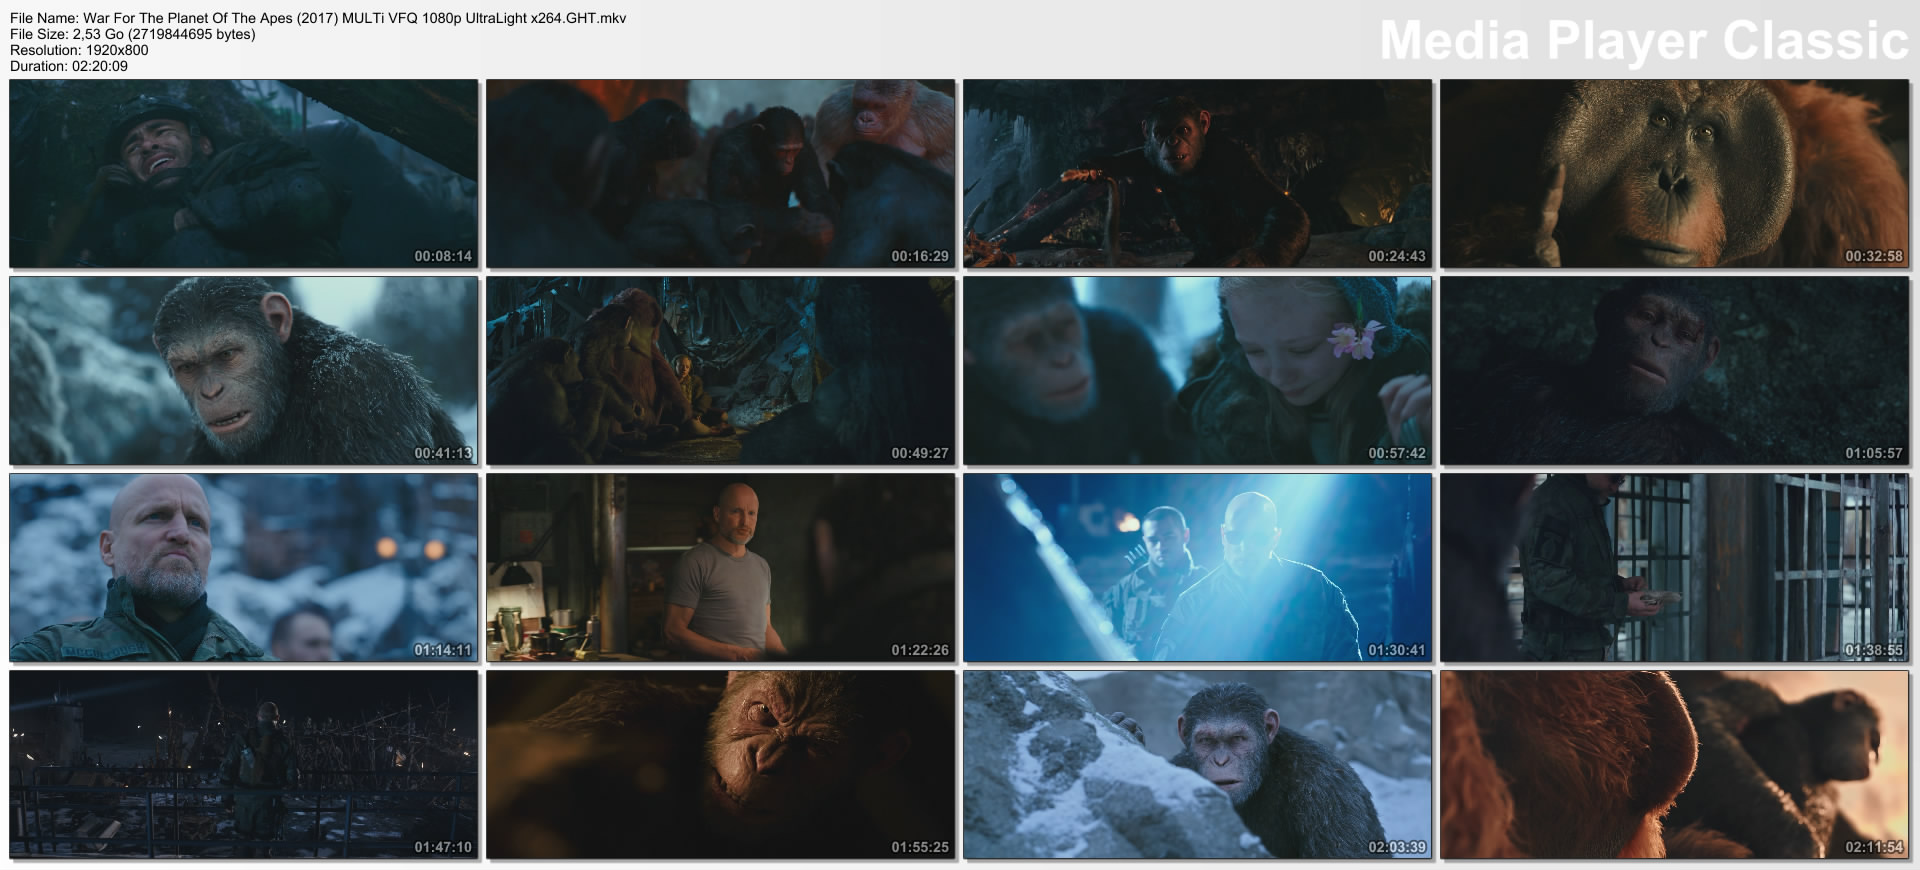 War For The Planet Of The Apes (2017) MULTi VFQ 1080p UltraLight x264.GHT